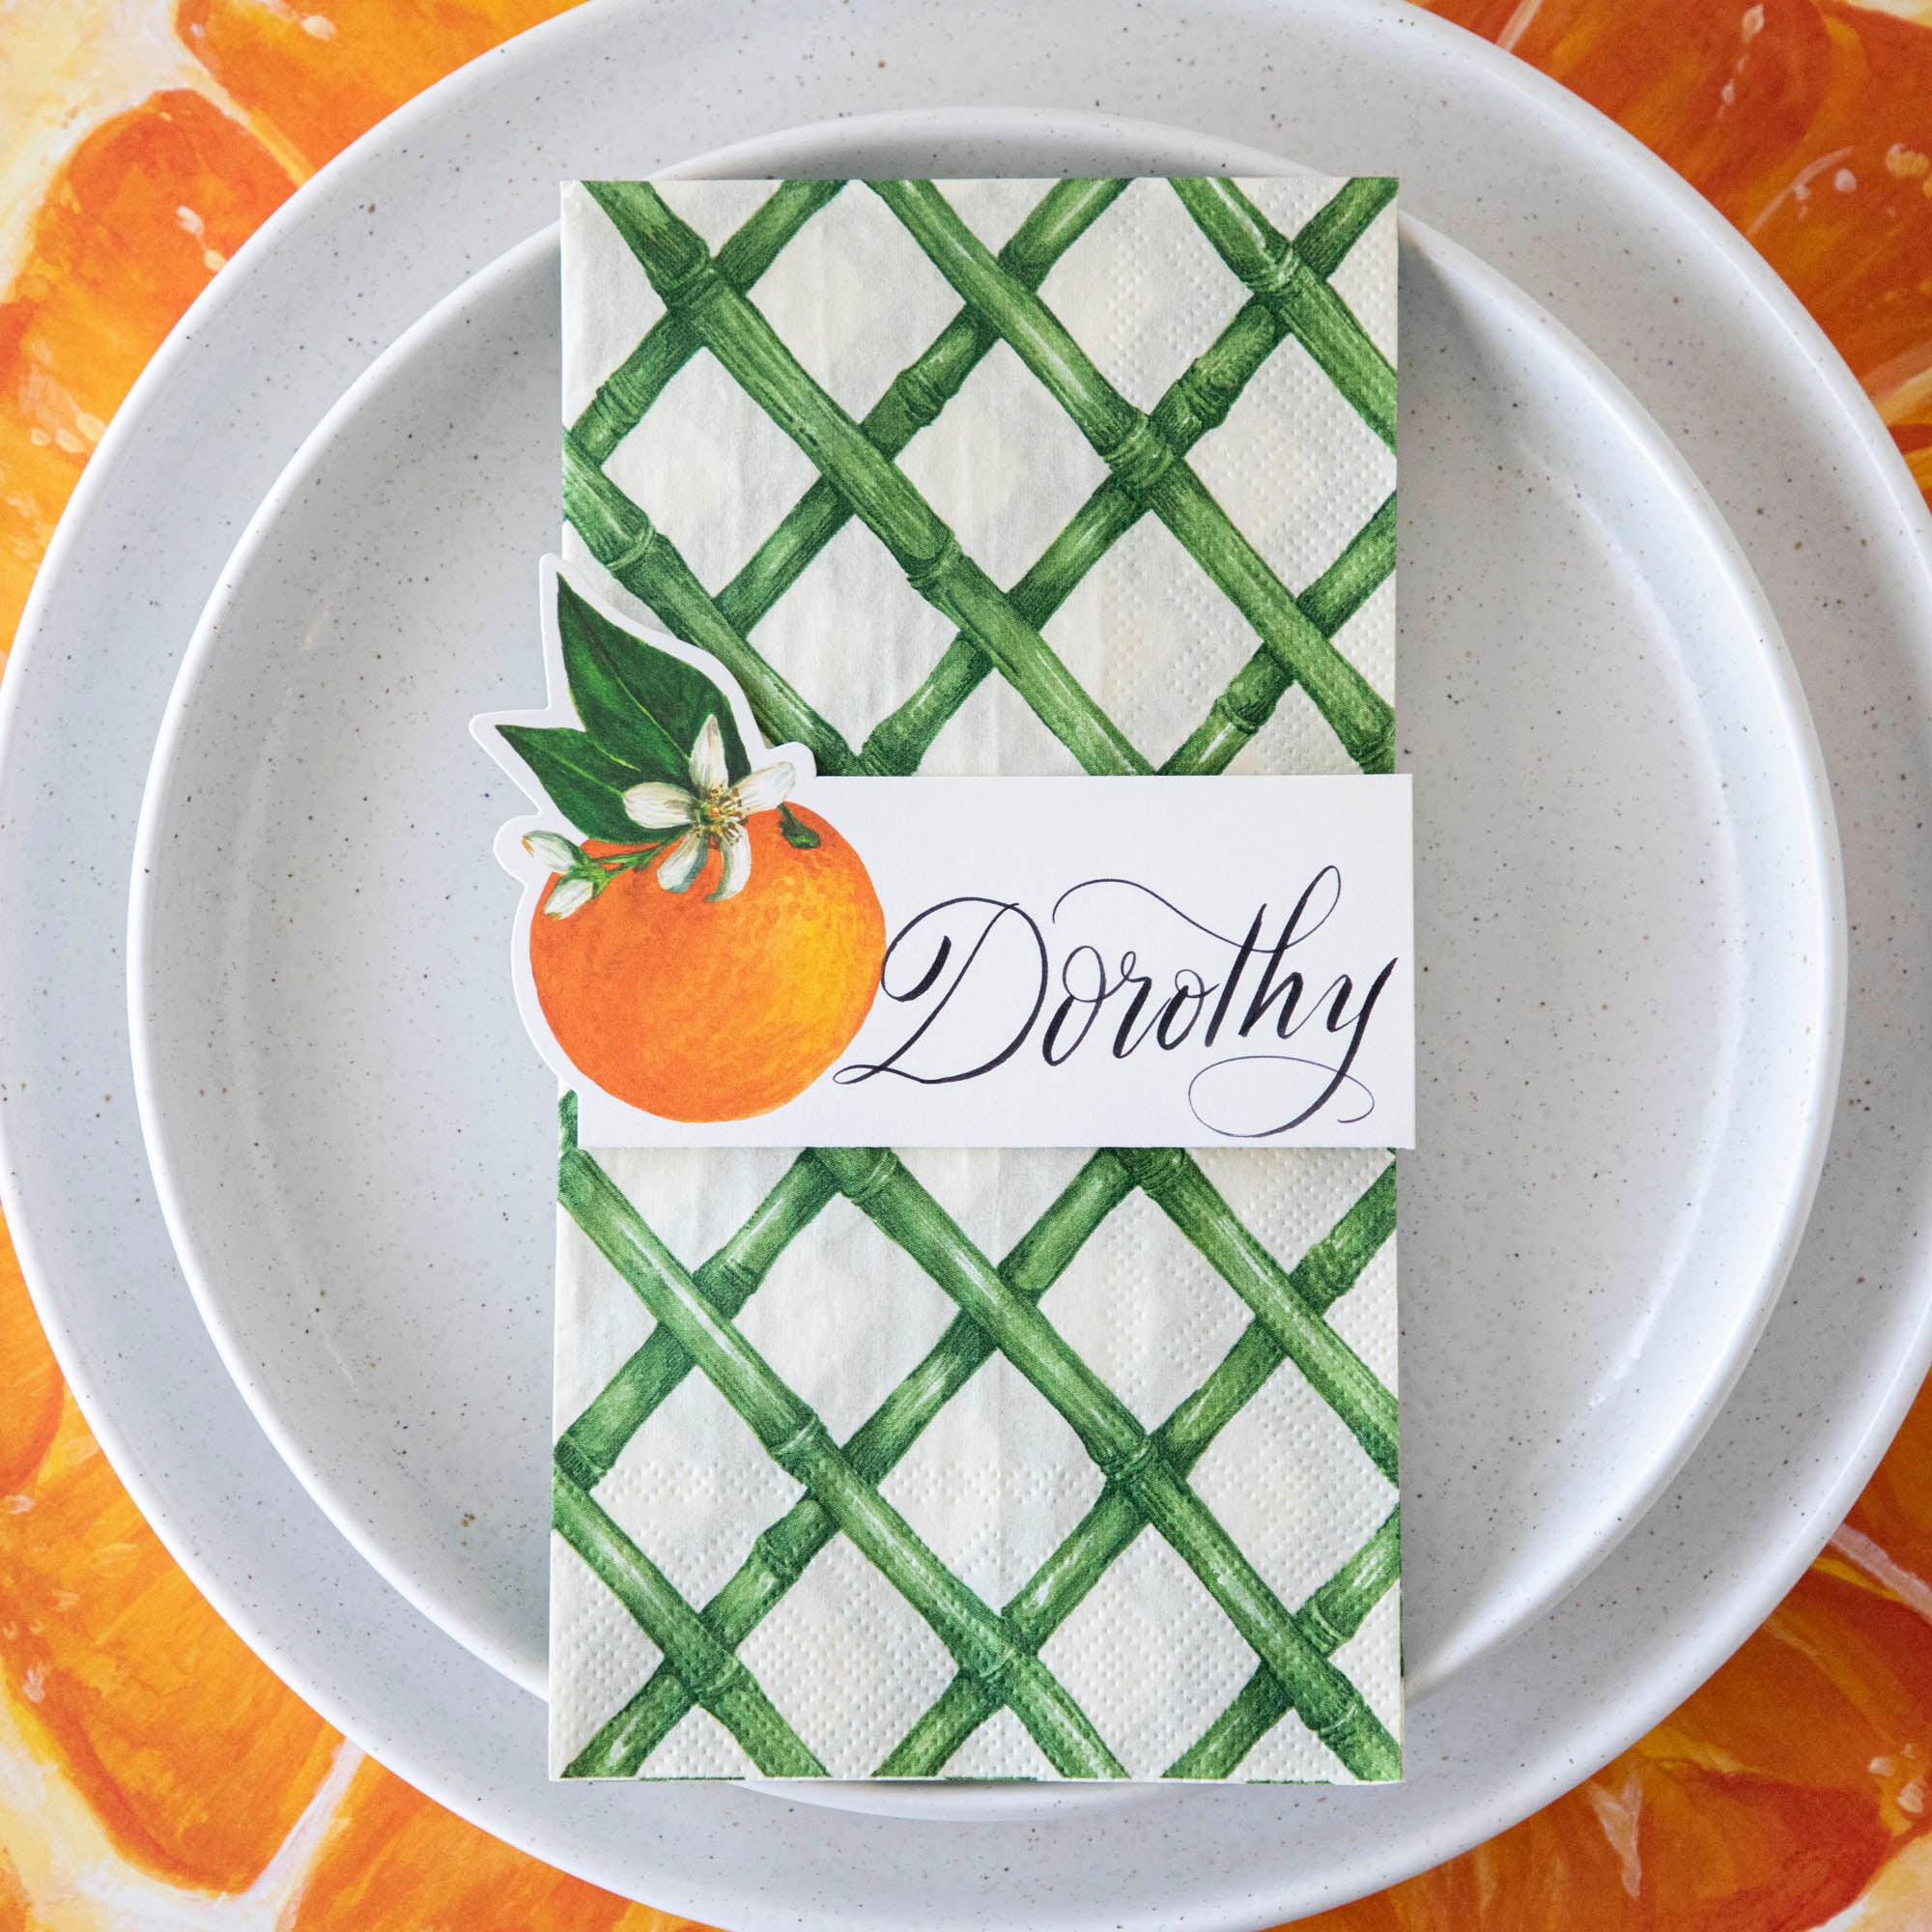 Top-down view of an elegant orange-themed place setting, featuring a Green Lattice Guest Napkin centered on the plate, with a place card.